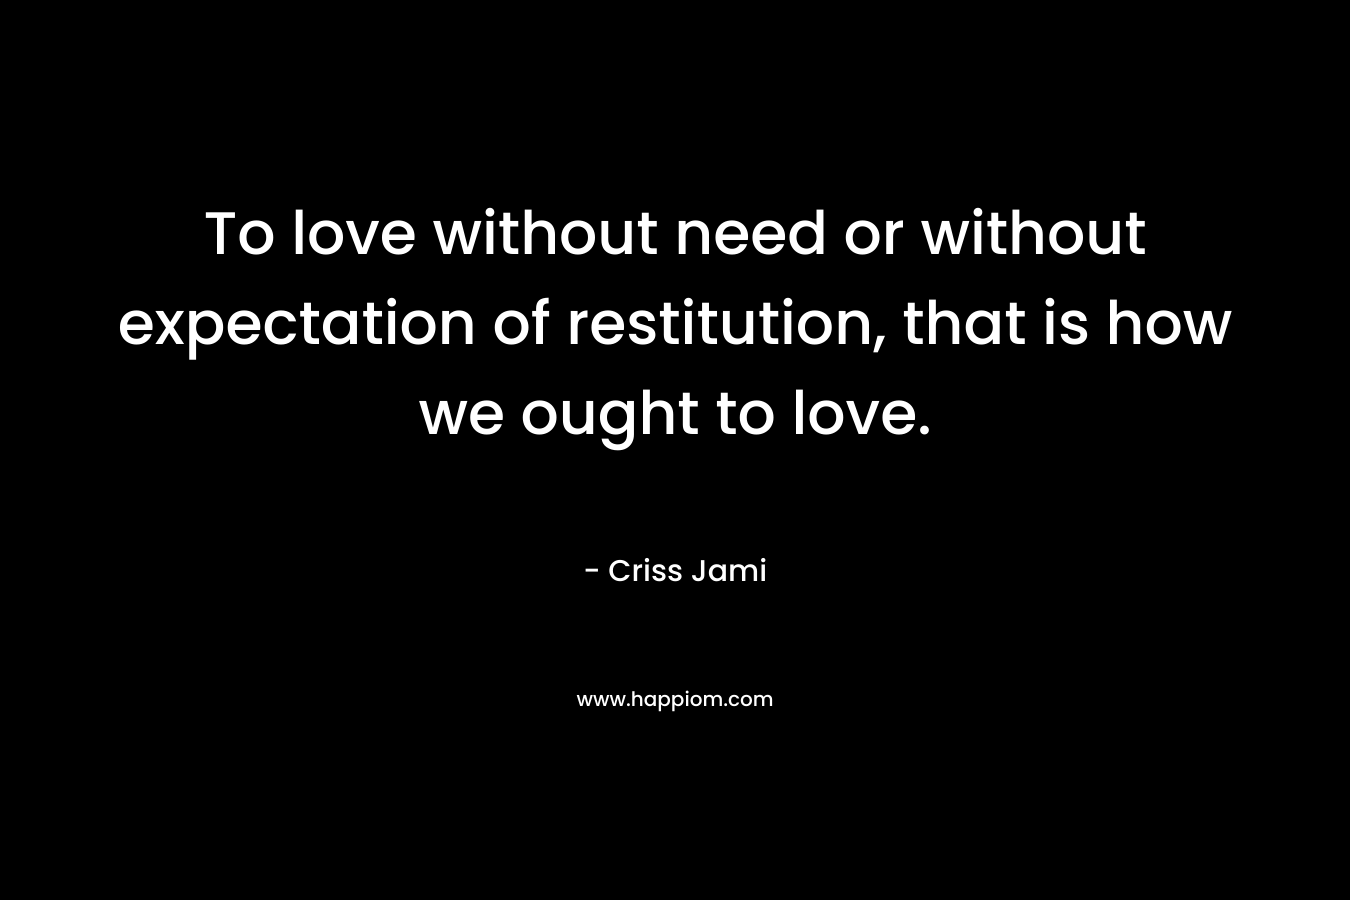 To love without need or without expectation of restitution, that is how we ought to love. – Criss Jami